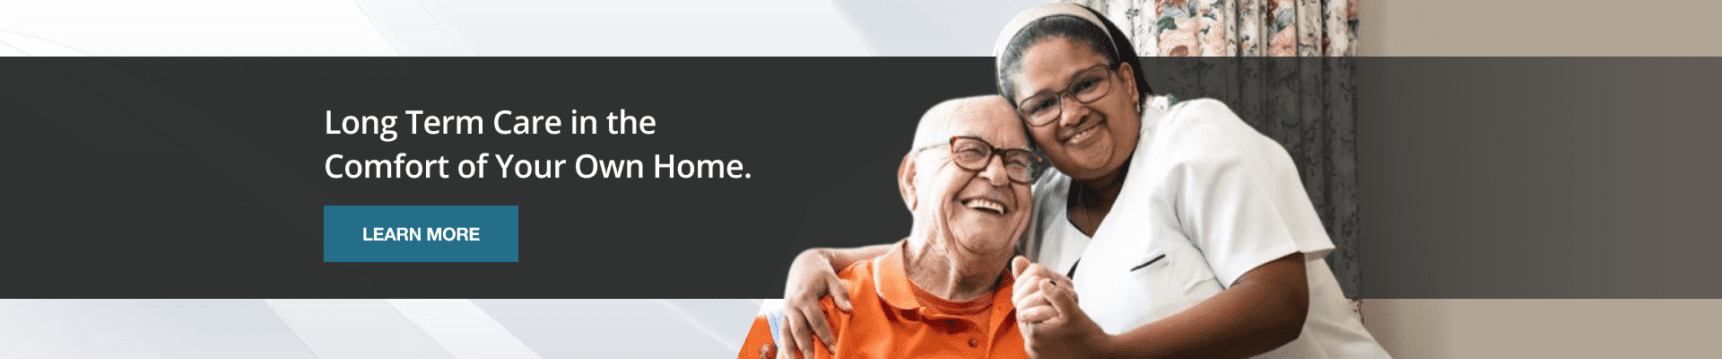 Long Term Care in New York City by SelectCare